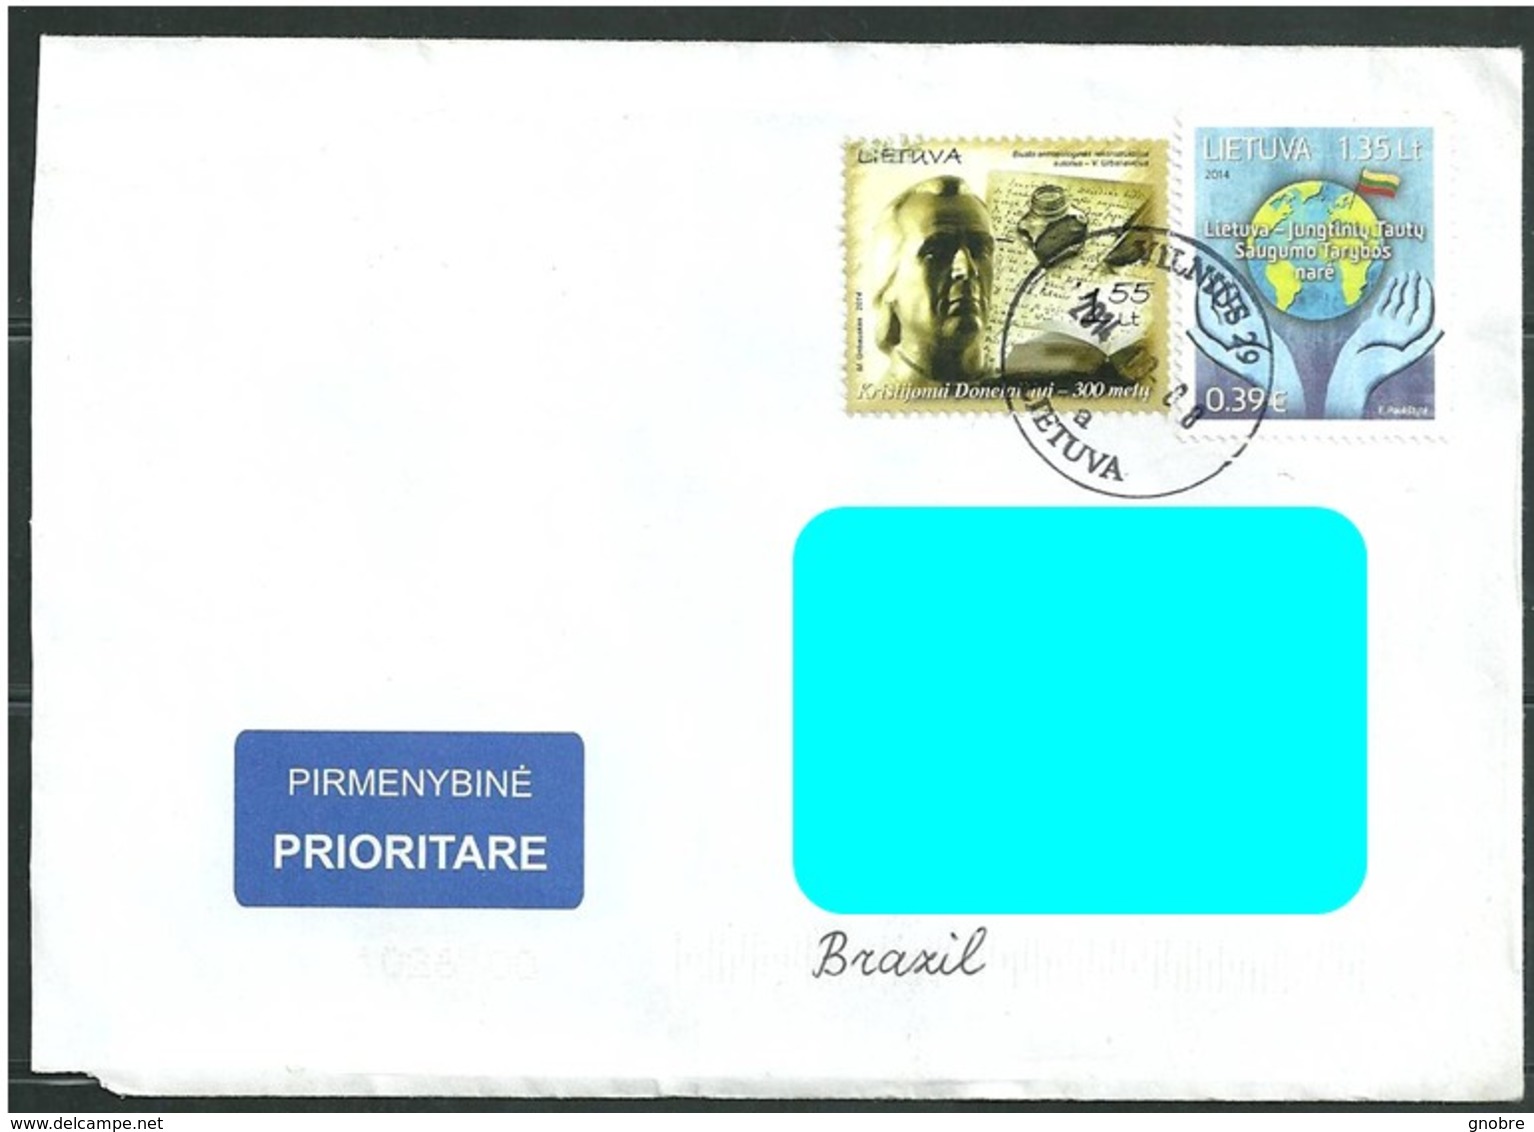 LITHUANIA To Brazil Cover Sent In 2014 With 02 Topical Stamps World Eath Hands Ink (GN 0177) - Lituania